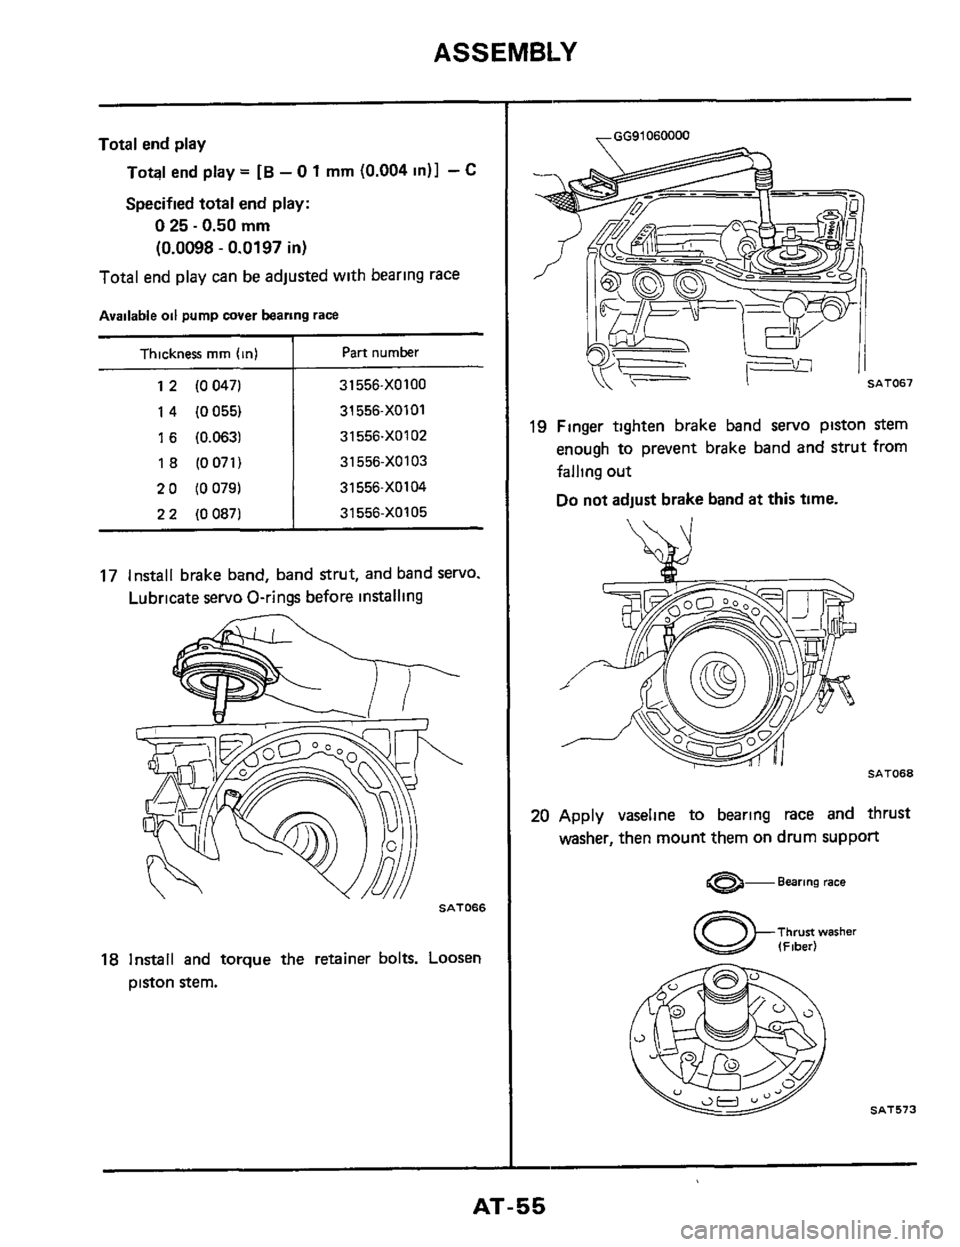 NISSAN 300ZX 1984 Z31 Automatic Transmission Repair Manual ASSEMBLY ~ 
Total 
end play 
Totql end play = [B - 0 1 mm (0.004 in)] - C 
Specified  total end play: 
0 25 - 0.50 mm 
(0.0098 - 0.0197 in) 
Total  end play  can be adjusted  with bearing  race 
Avail